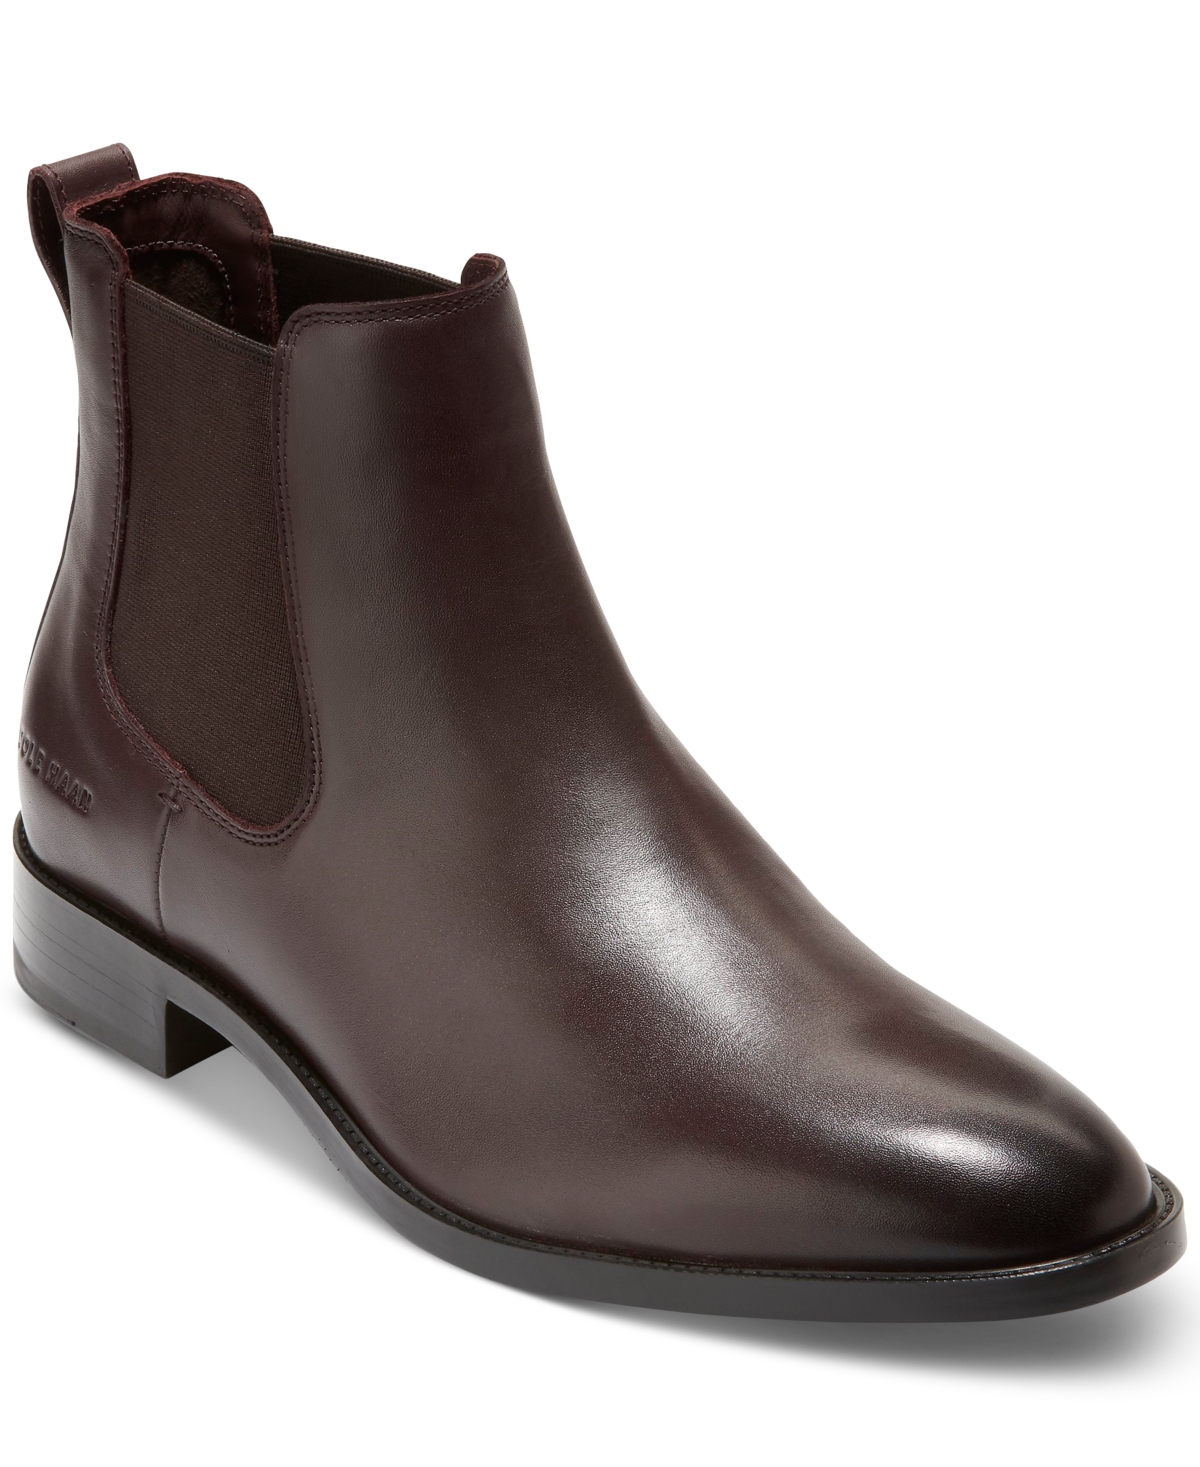 Cole Haan Men's Hawthorne Leather Pull-On Chelsea Boots Men's Shoes